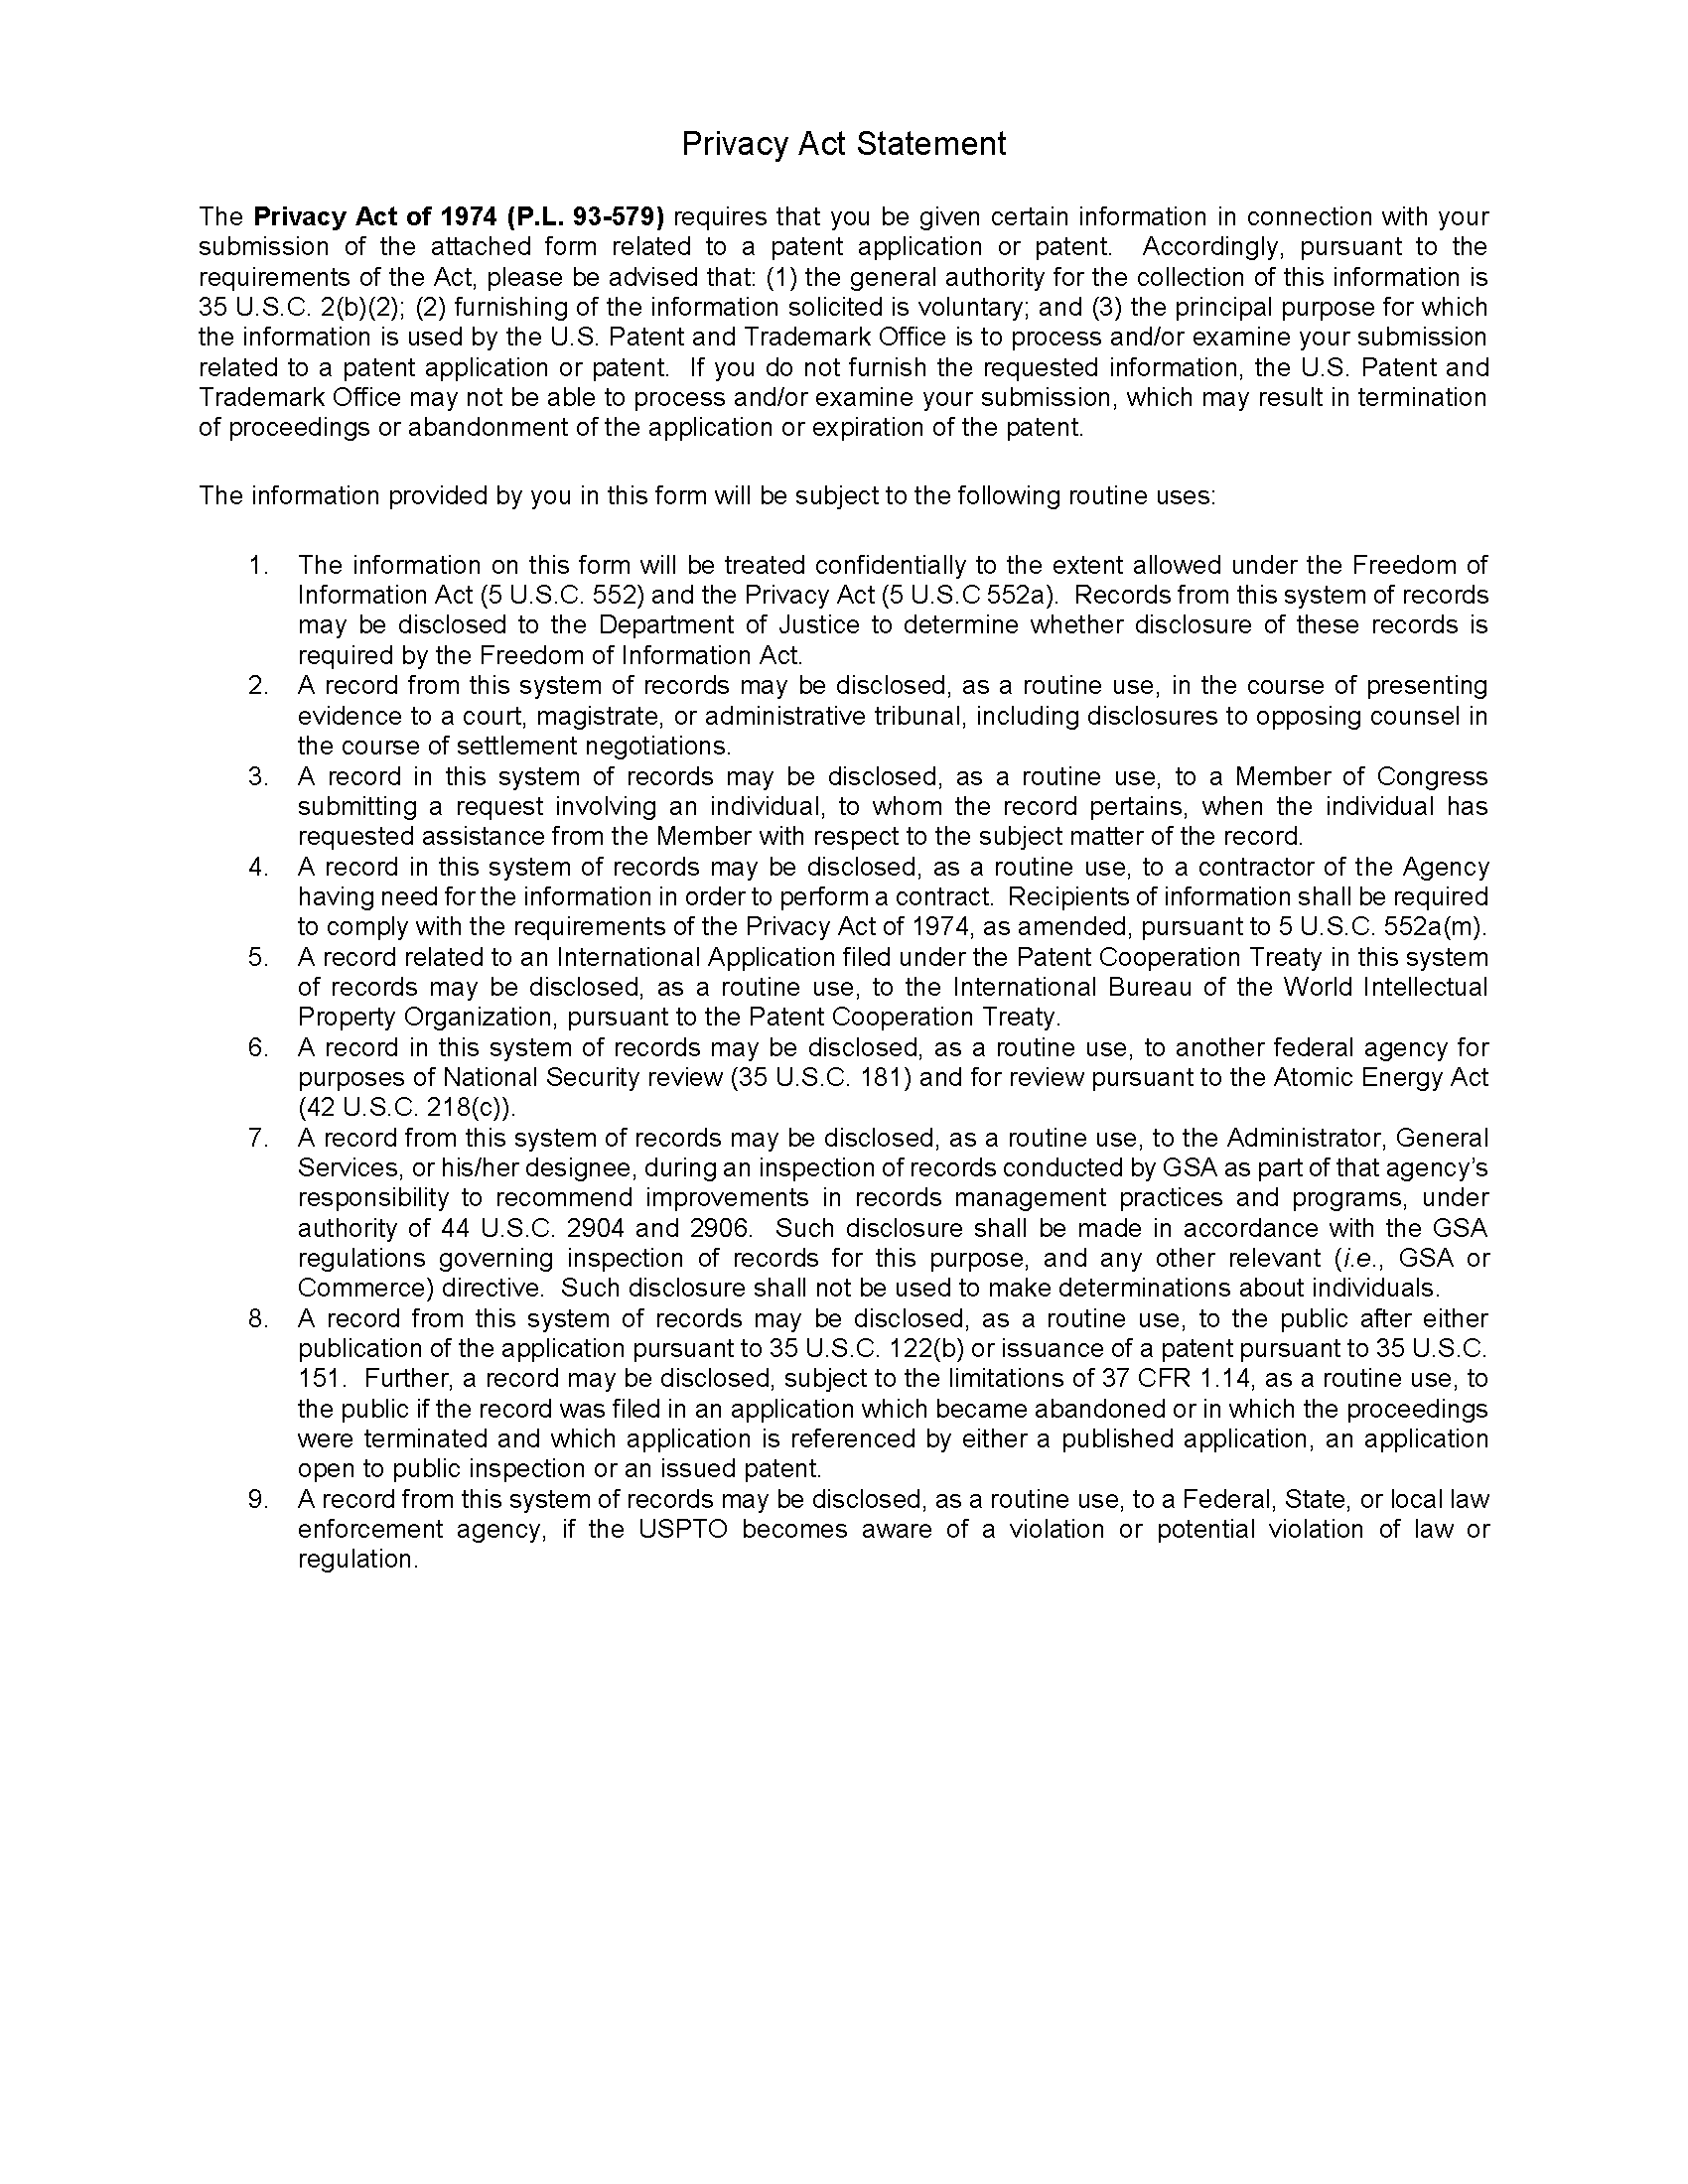 Privacy Act Statement (page 2 of form PTO/AIA/80)